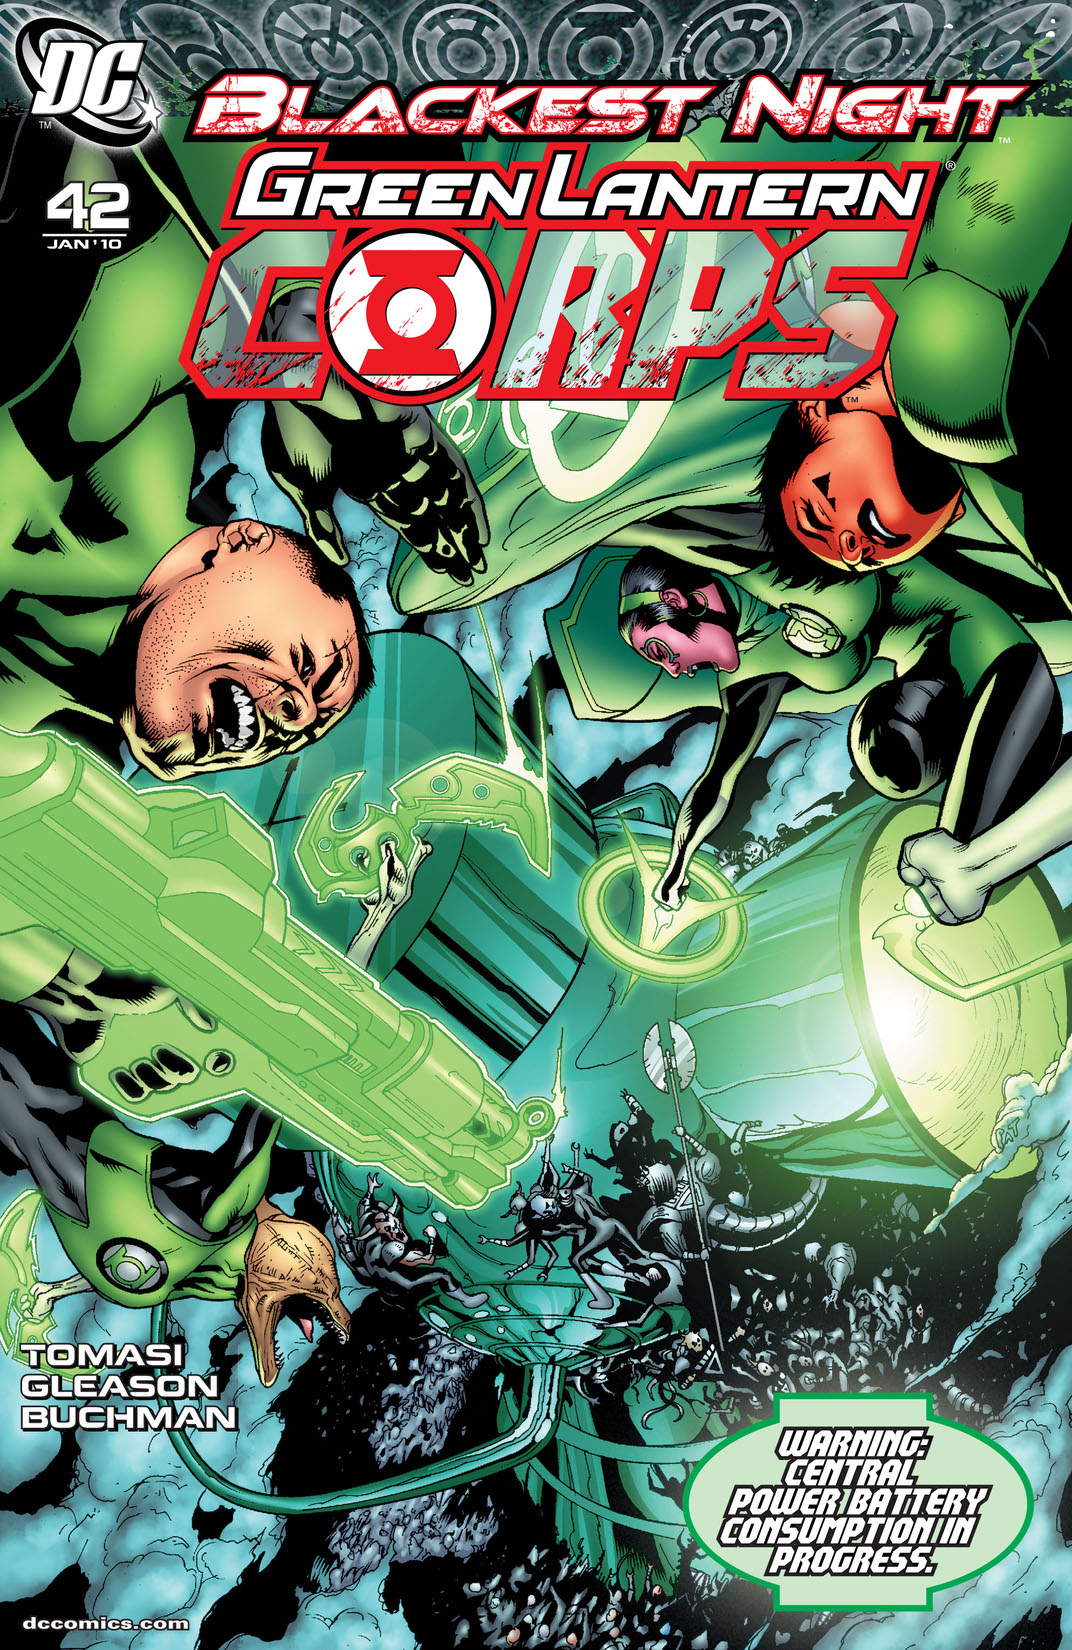 Green Lantern Corps (2006-) #42 preview images